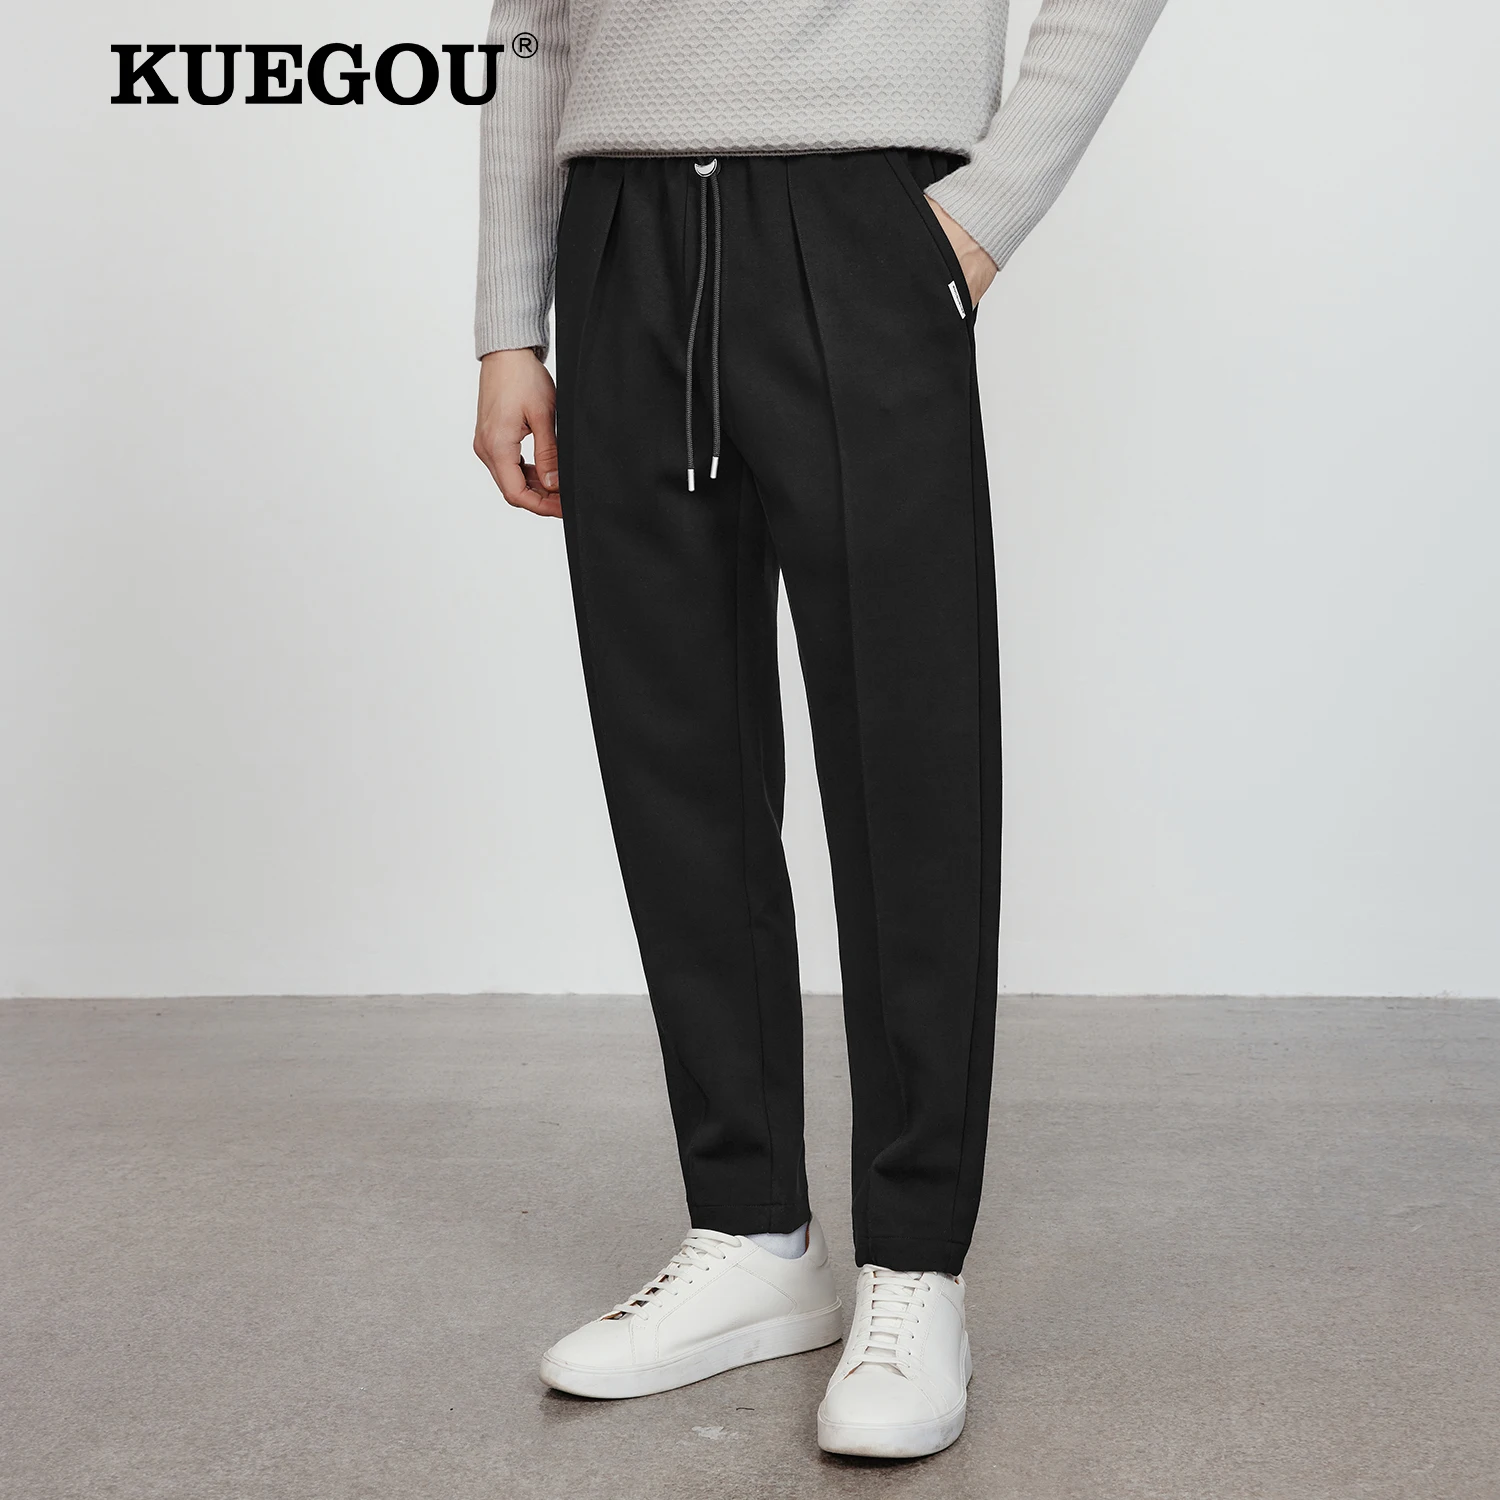 KUEGOU 2022 Autumn Cotton Solid Black Gray Casual Pants Men Classic Brand For Male Wear Work Straight Pocket Long Trousers 5009